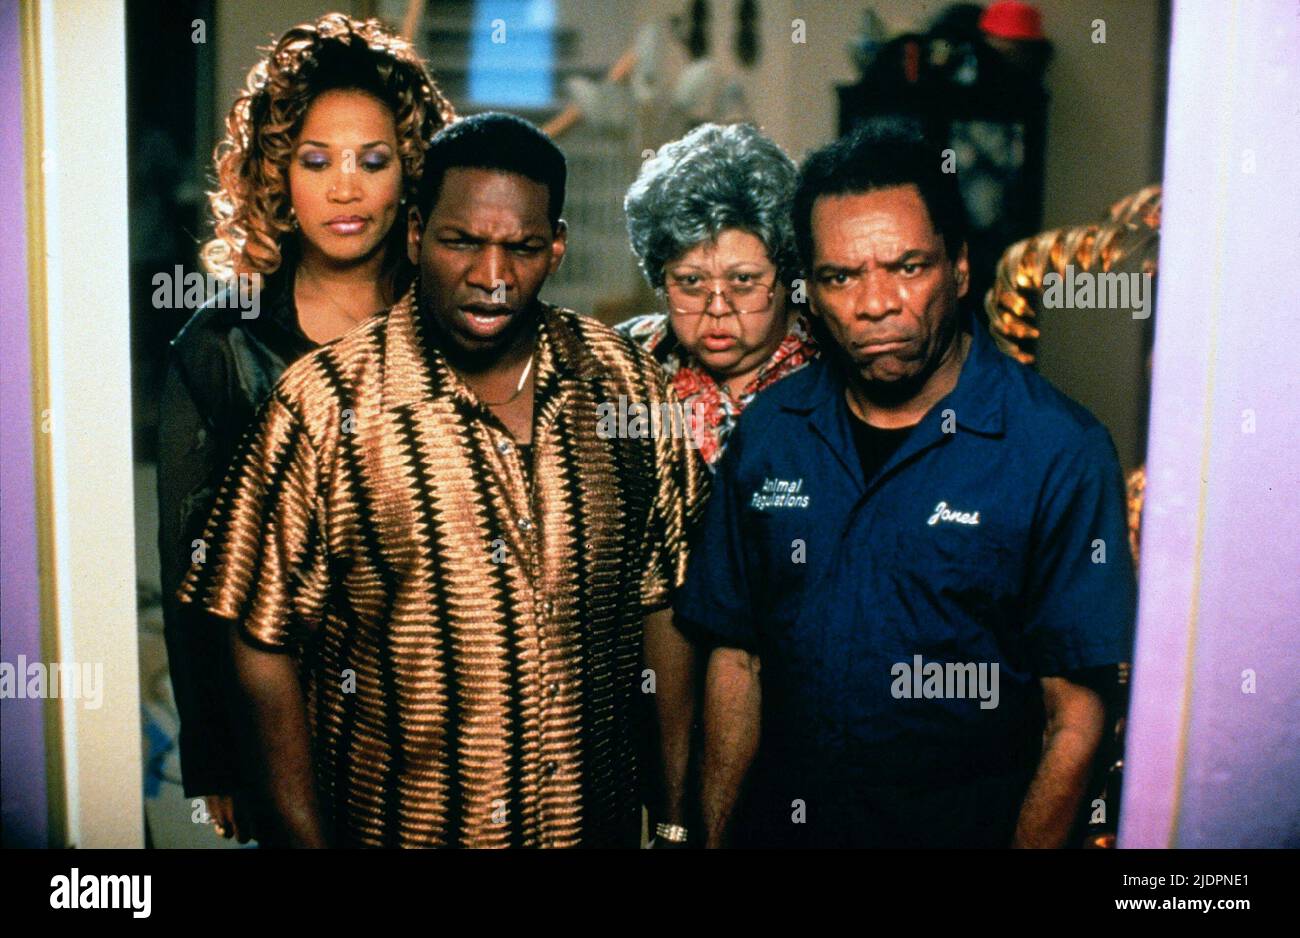 WHITLEY, CURRY, HILL, WITHERSPOON, VENERDÌ PROSSIMO, 2000 Foto Stock